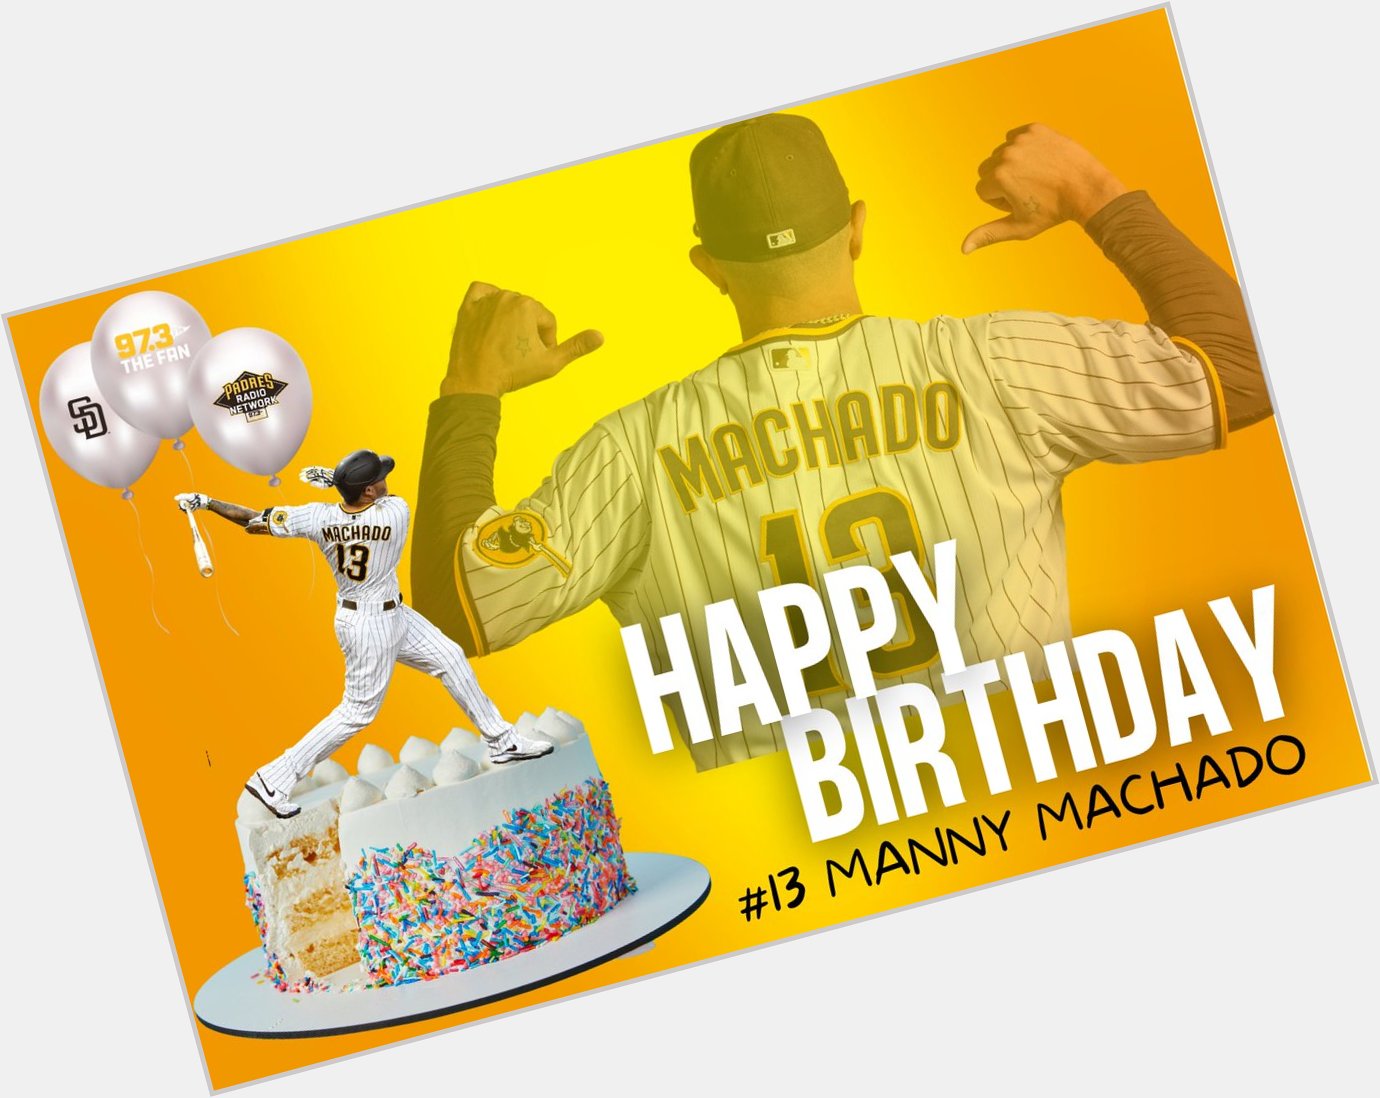 Wishing a very happy 30th birthday to Manny Machado! Looking forward to many more great years in brown and gold. 